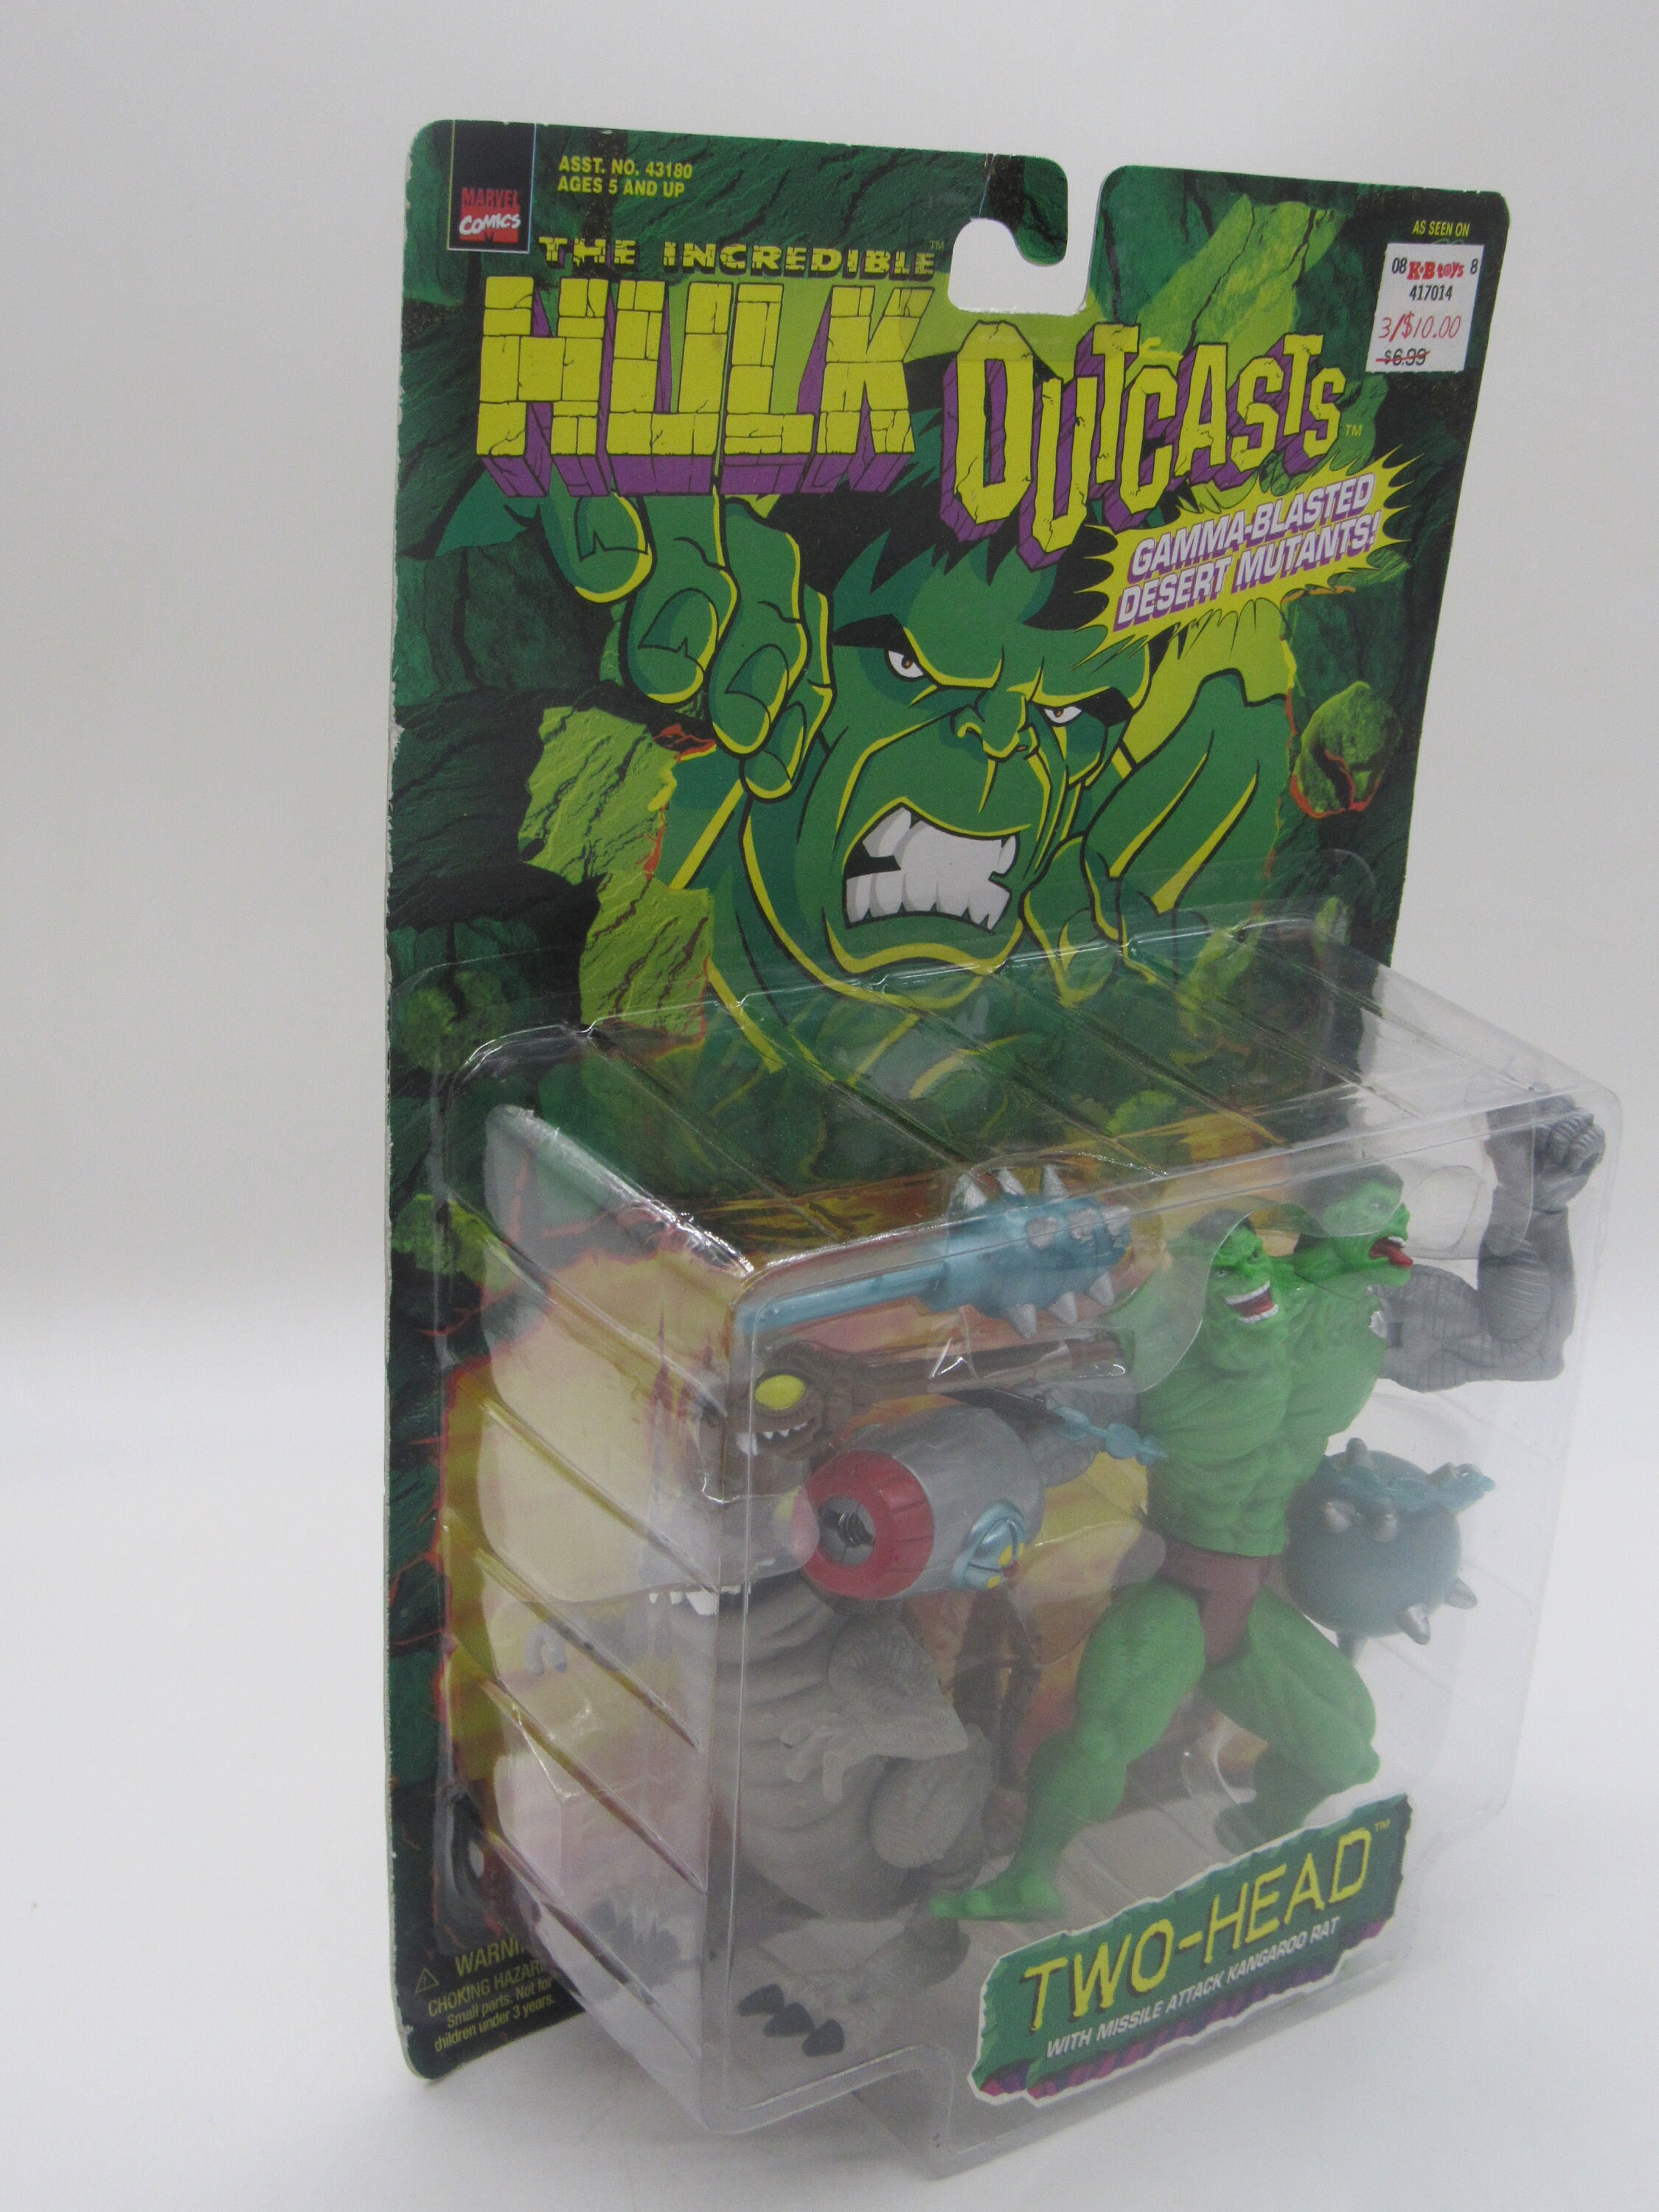 The Incredible Hulk Outcasts Two-Head with Attack Kangaroo Rat Toy Biz 1997